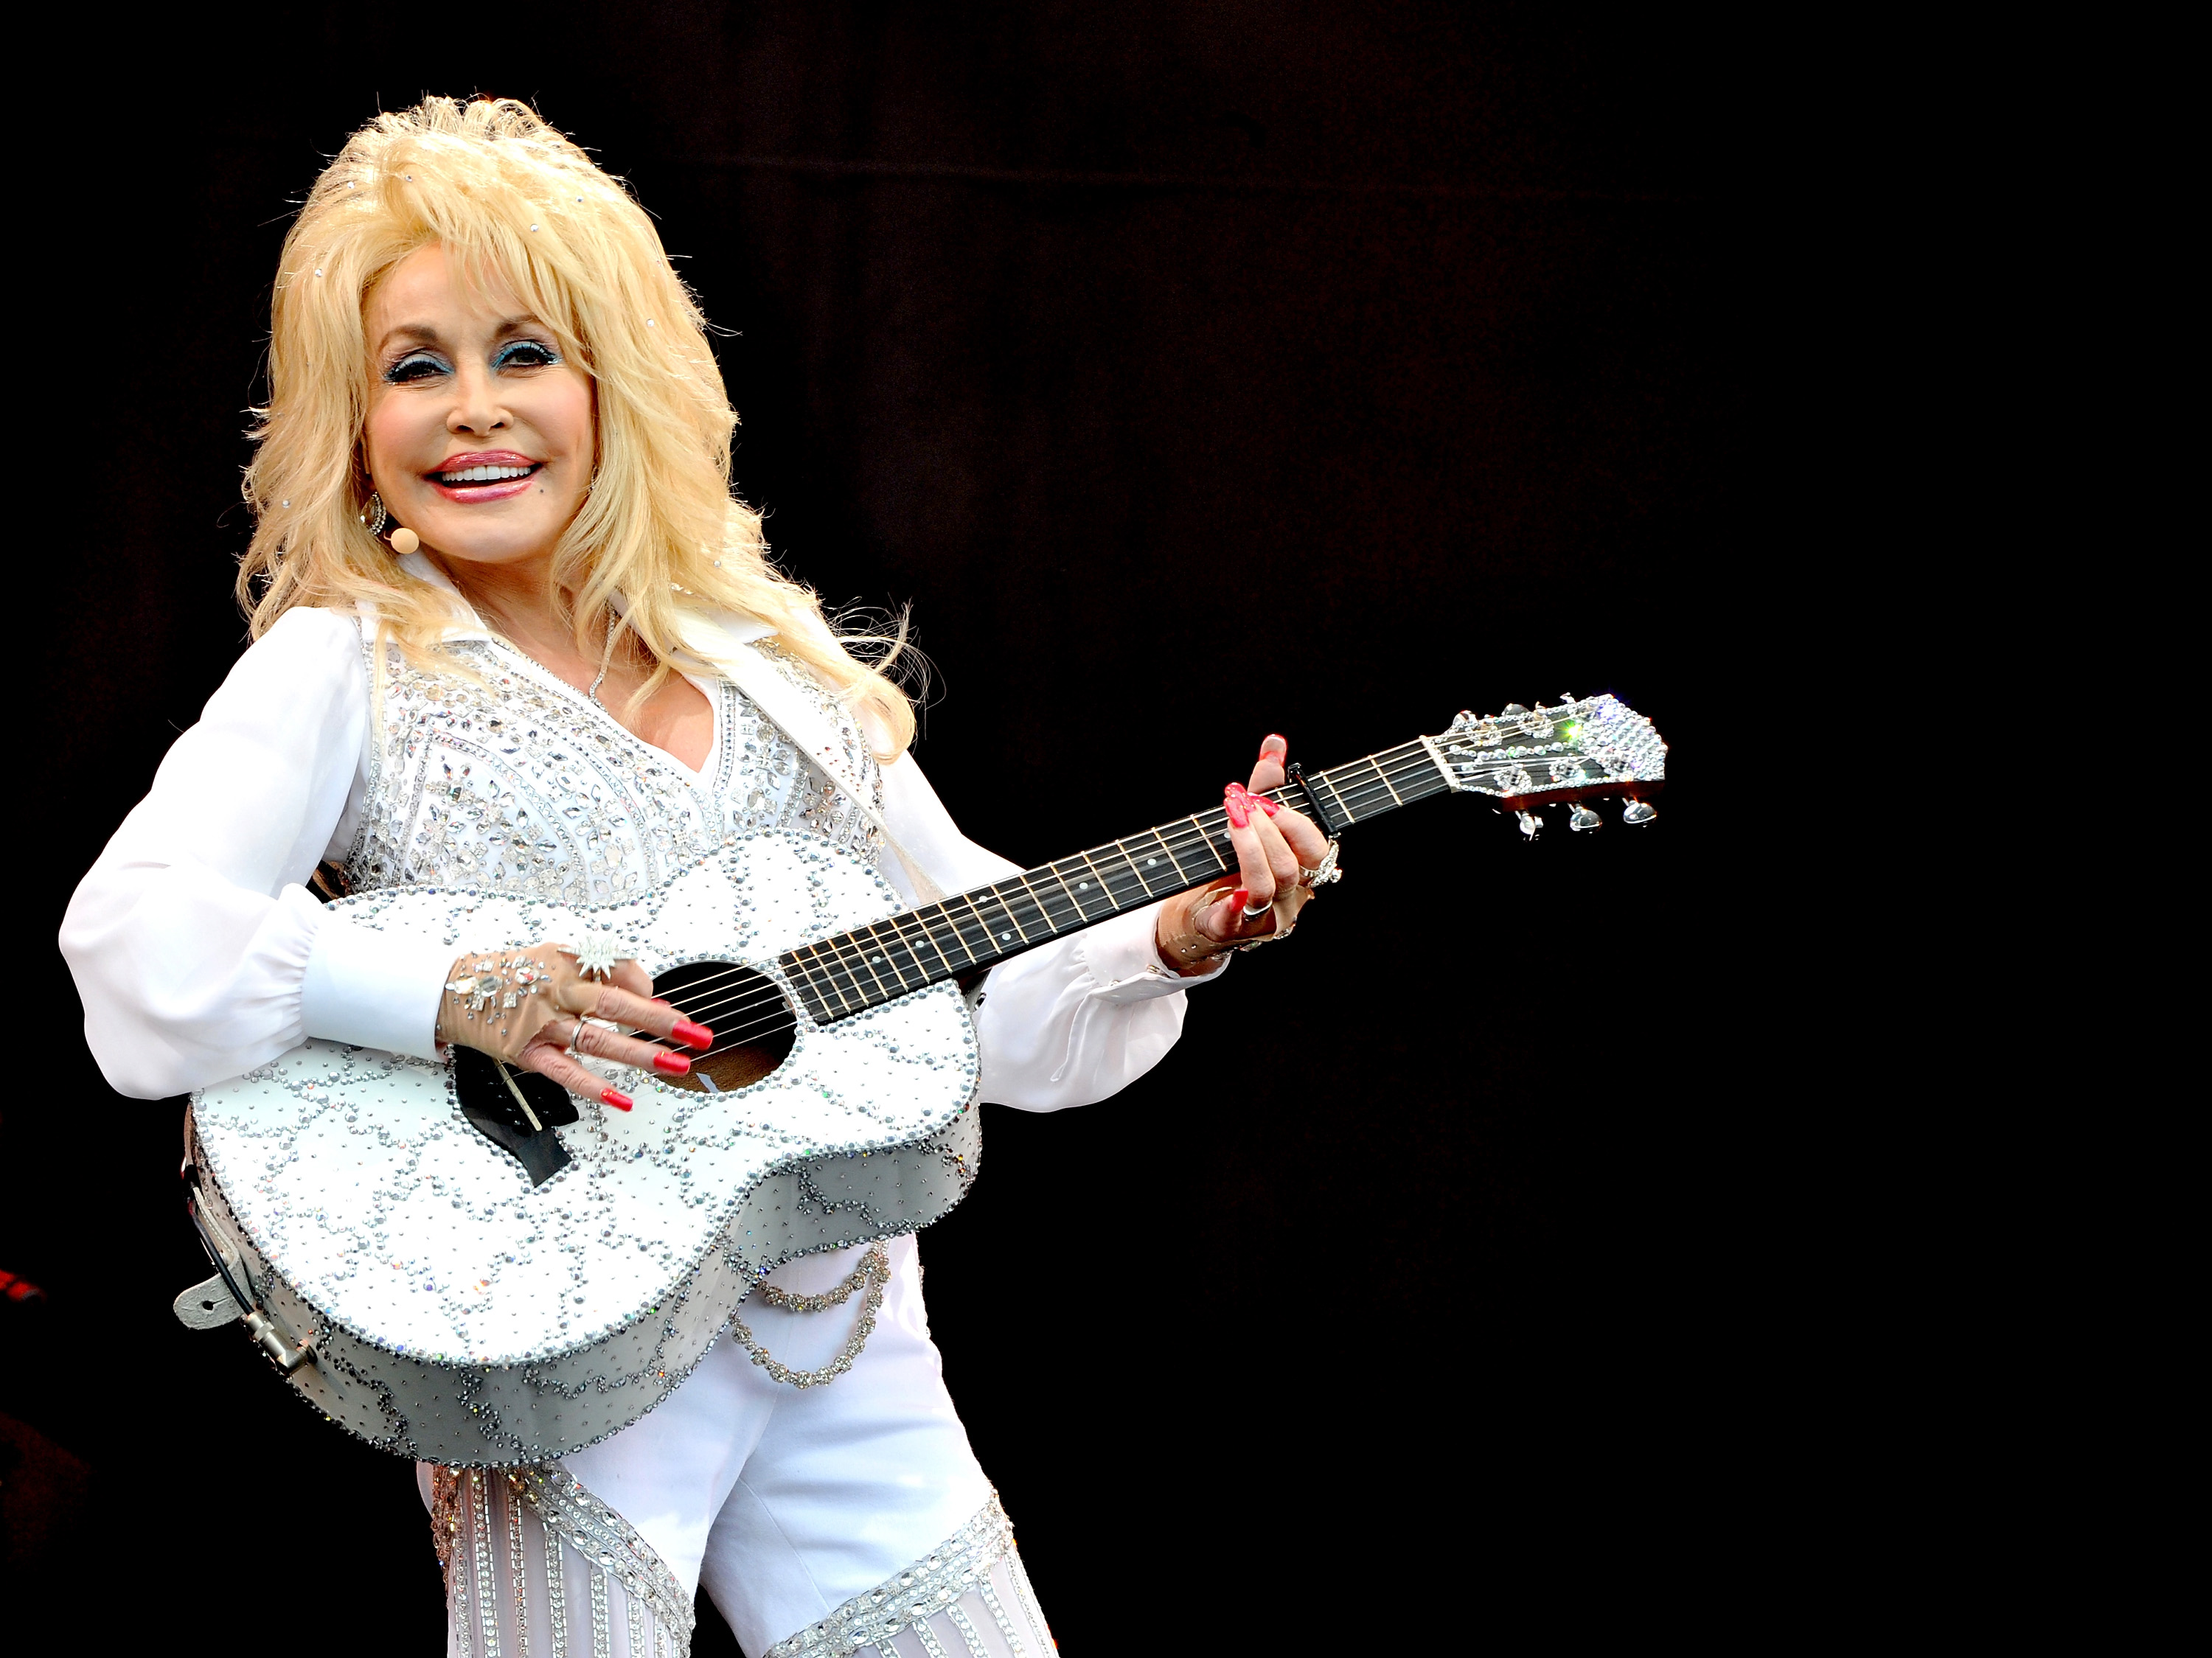 Dolly Parton poses with a white, bejeweled guitar